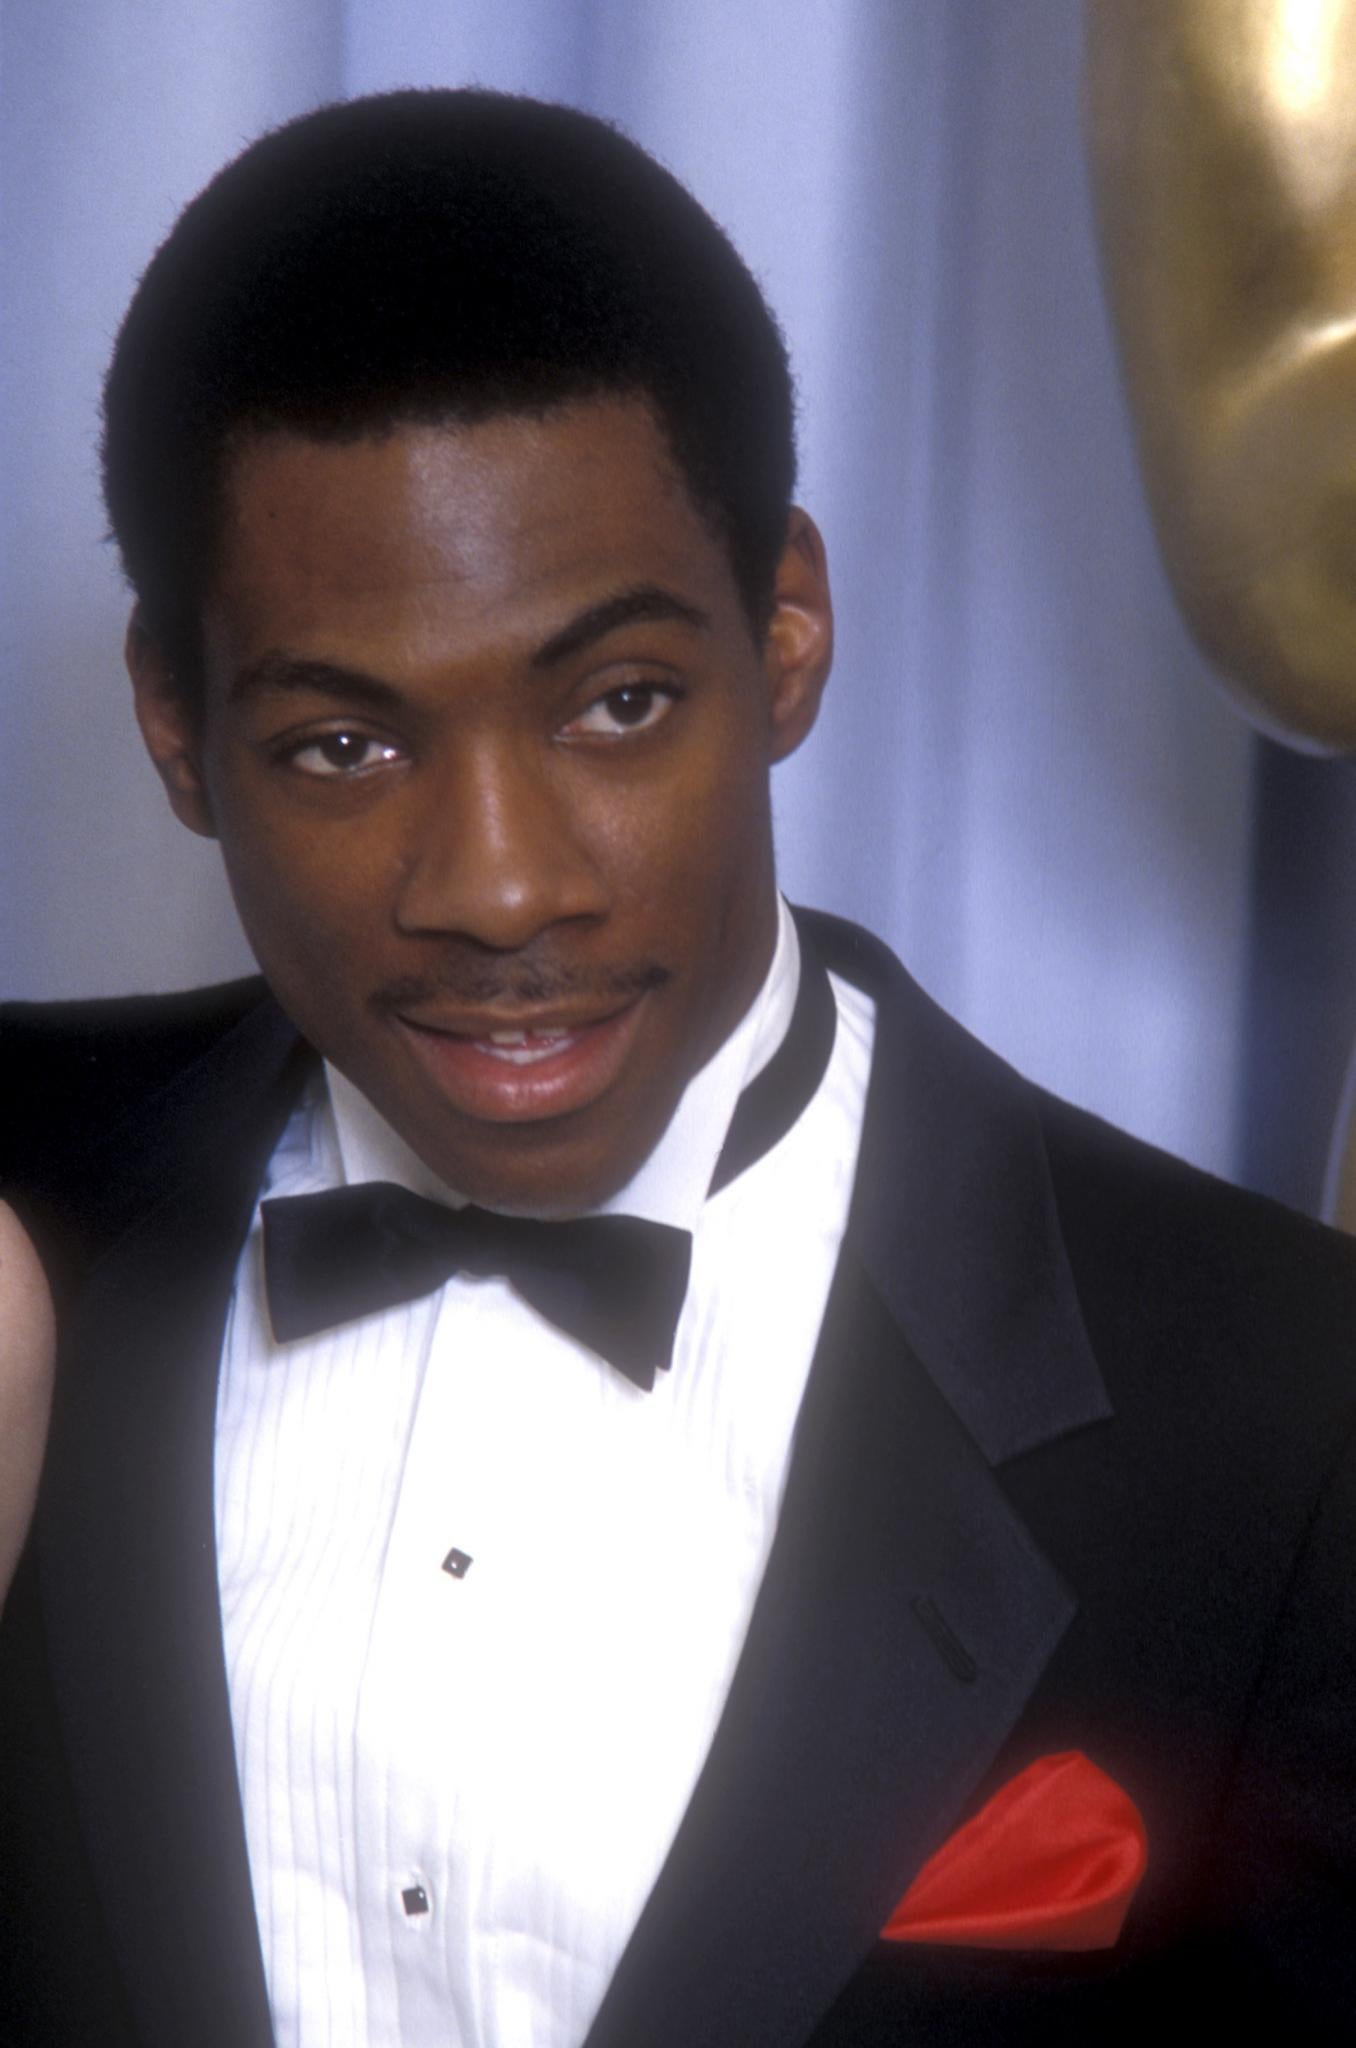 Here's What Eddie Murphy Said About Lack of Diversity At the Oscars Way Back in 1988